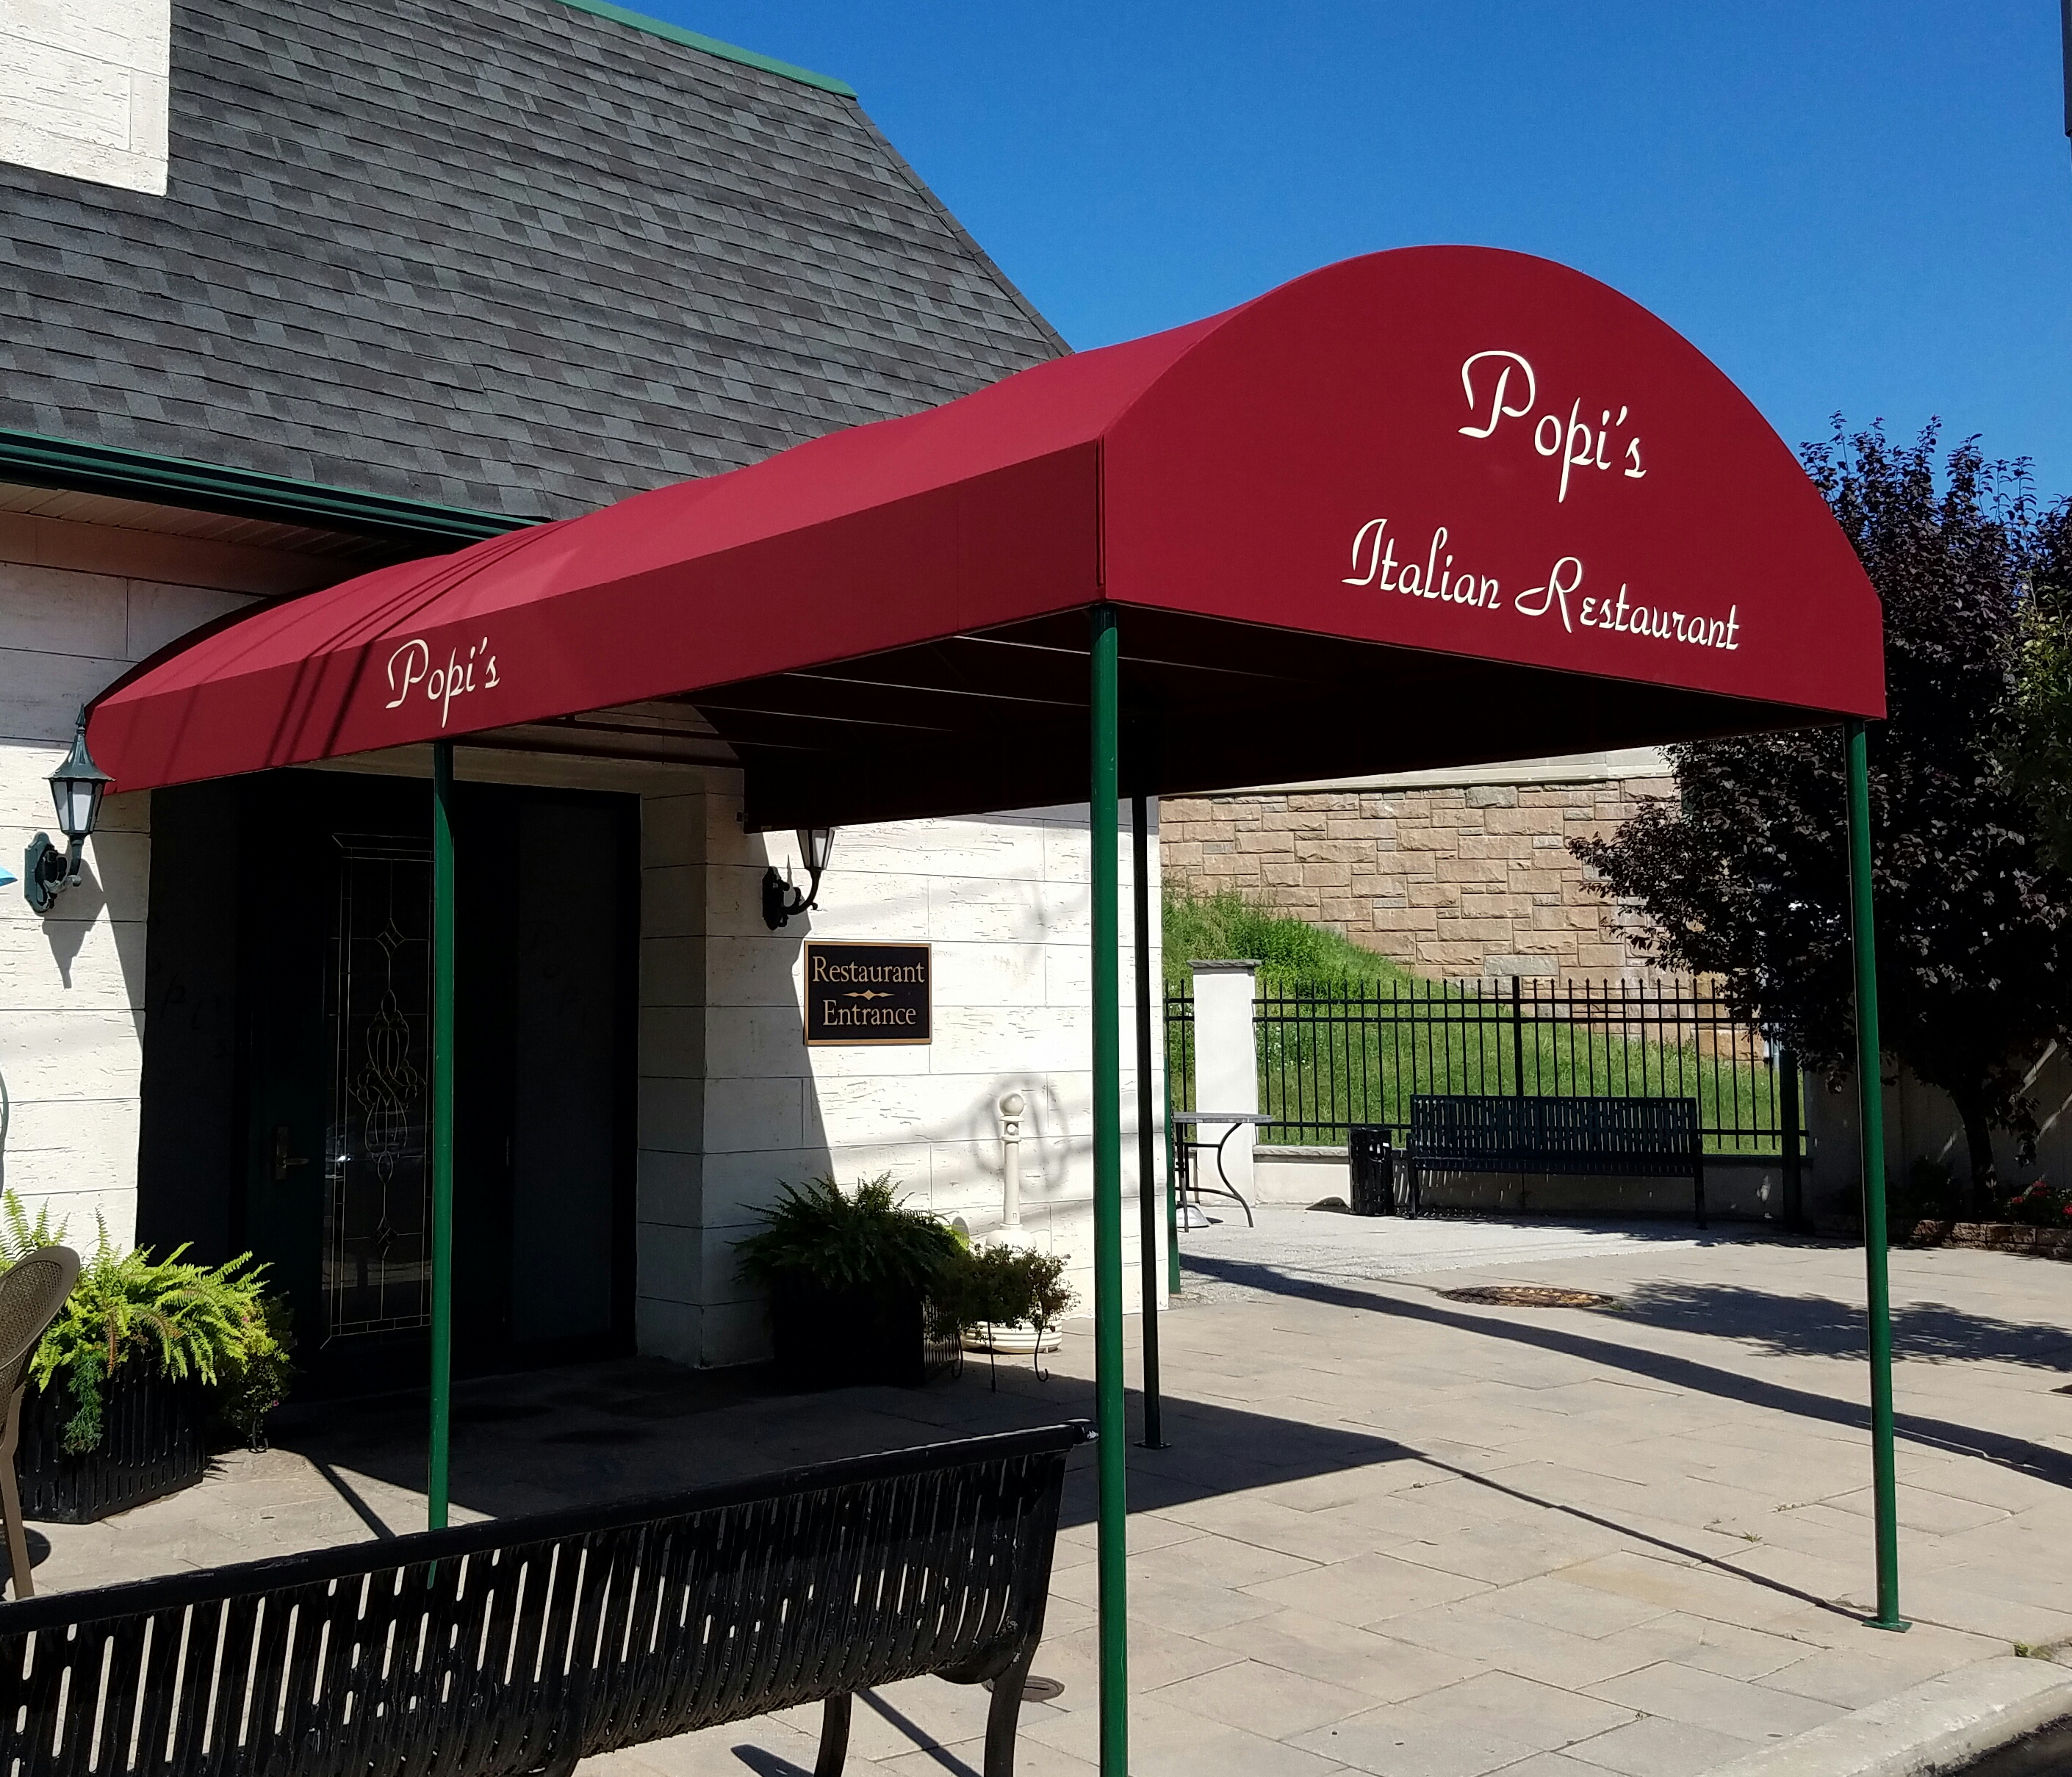 shelter guests entering your business with an entryway awning like this